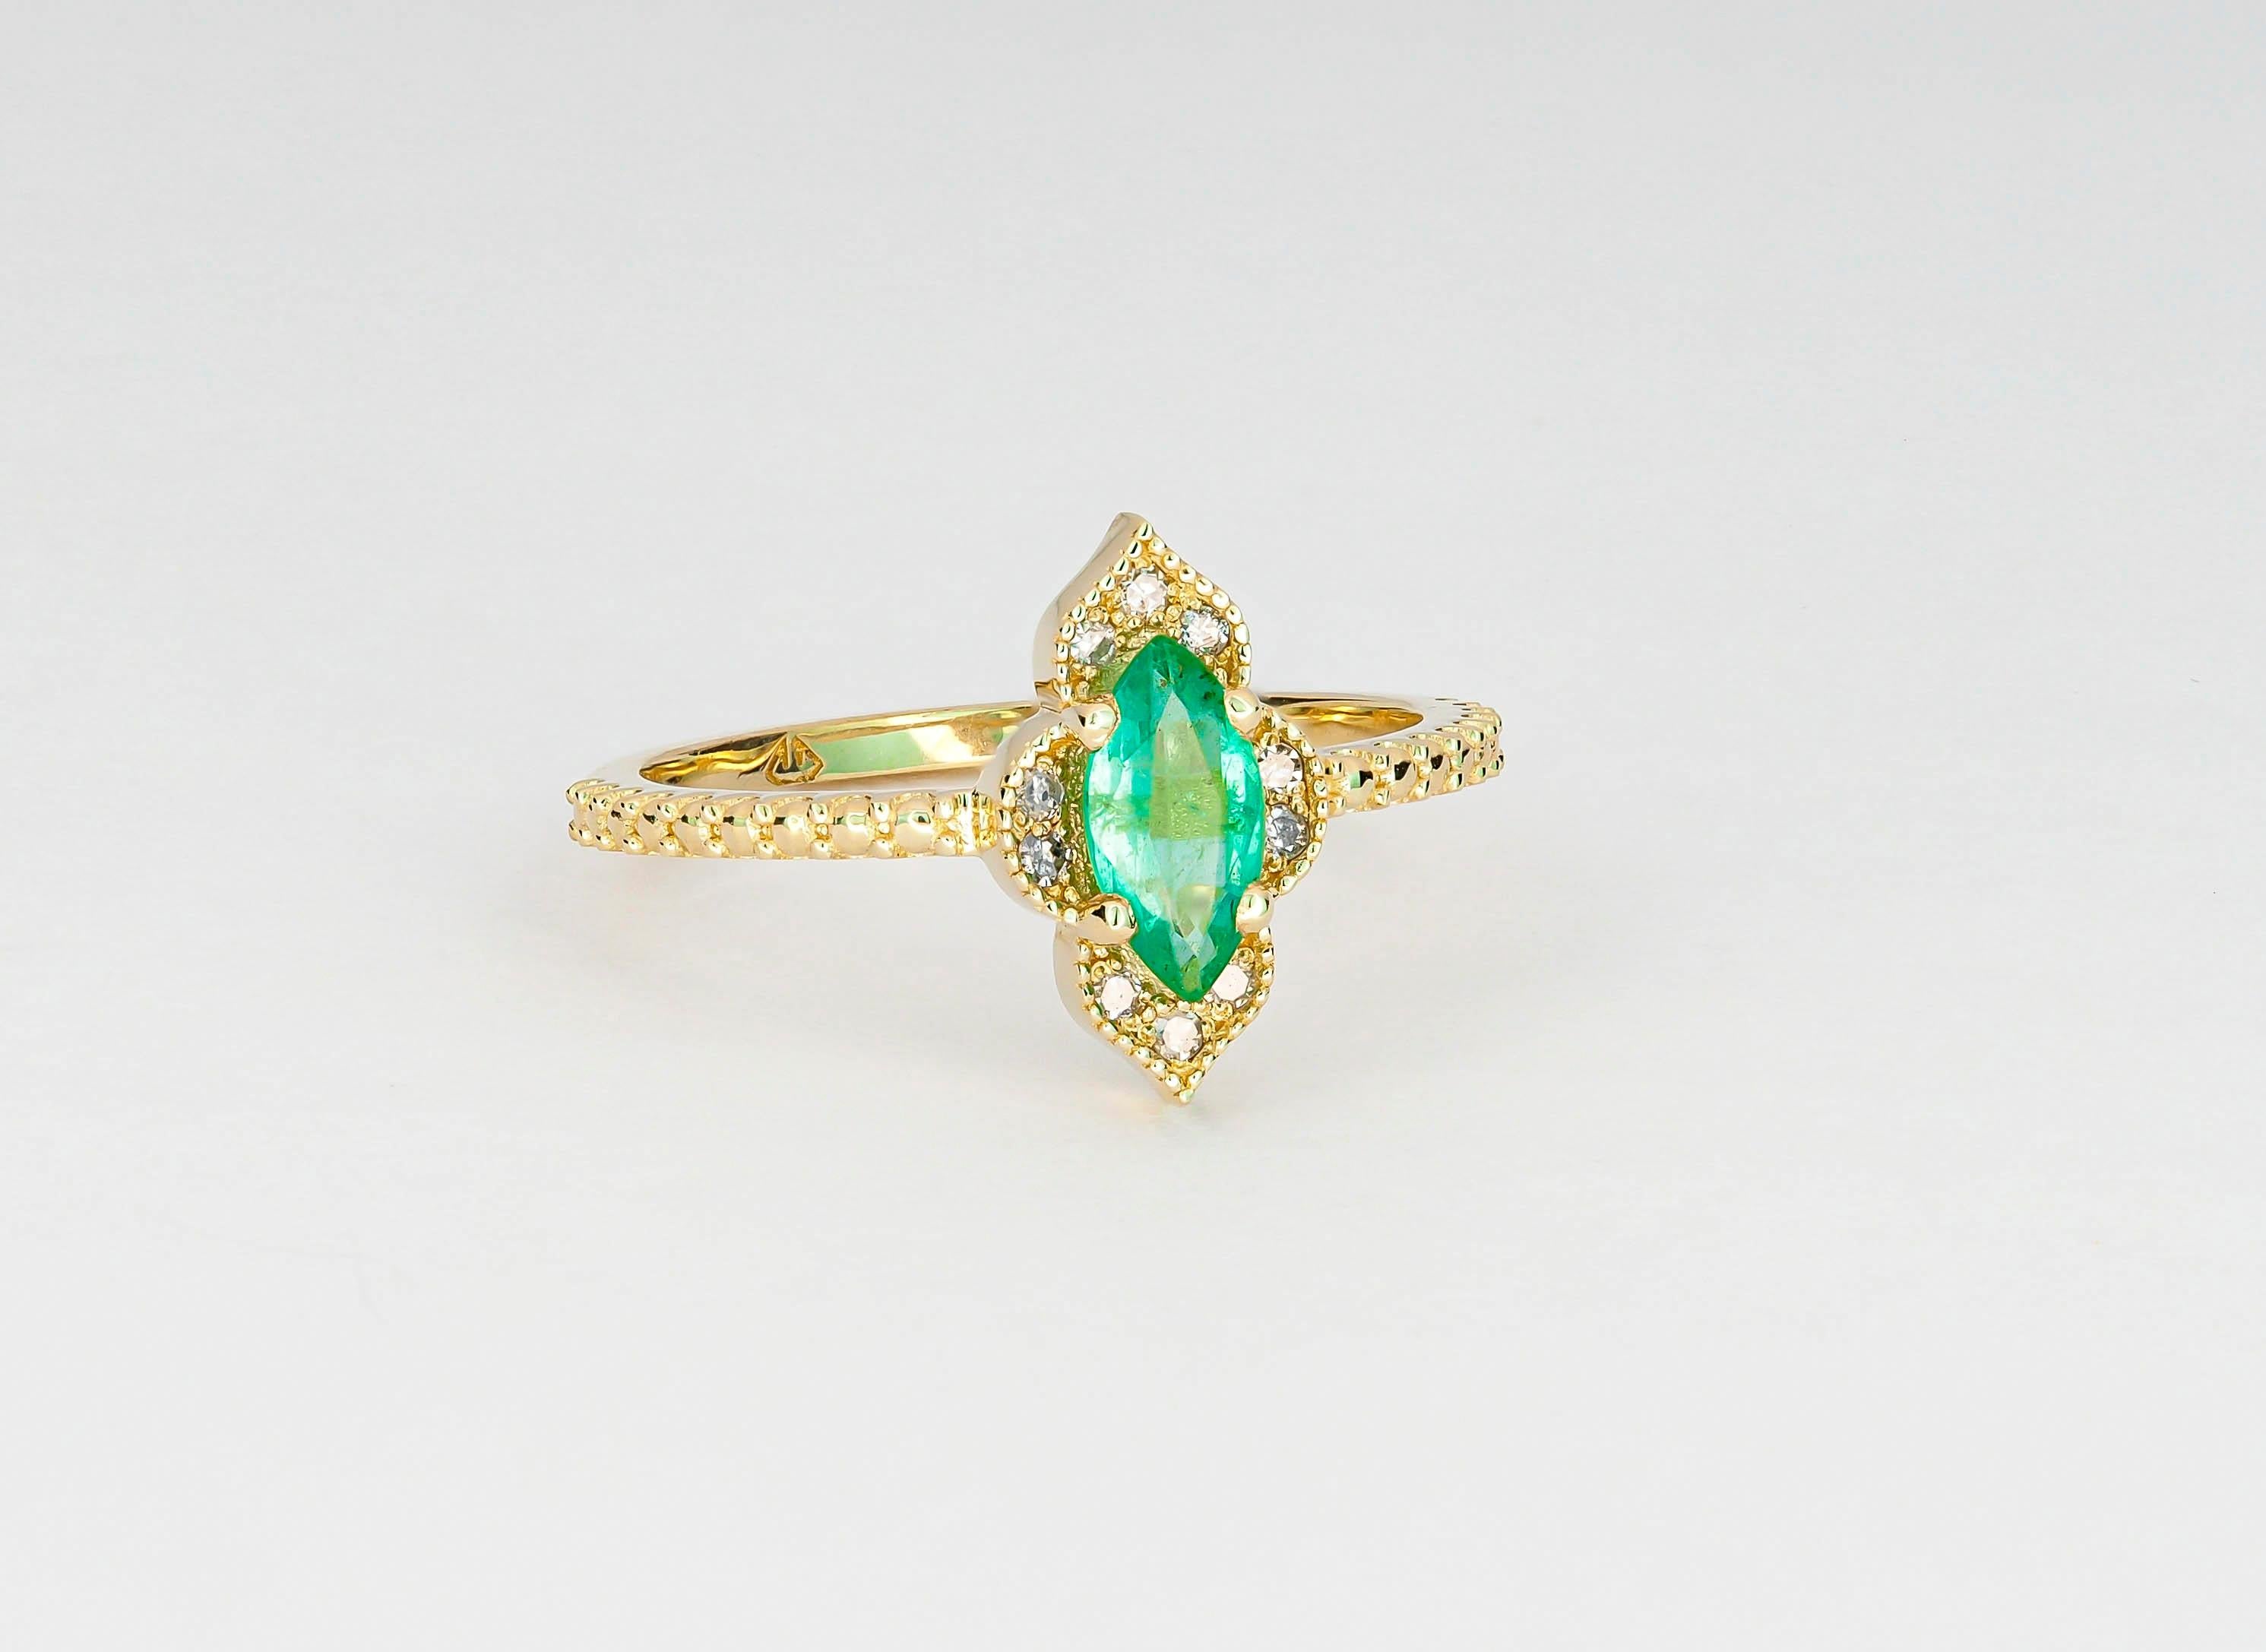 Women's 14 Karat Solid Gold Ring with Natural Emerald and Diamonds